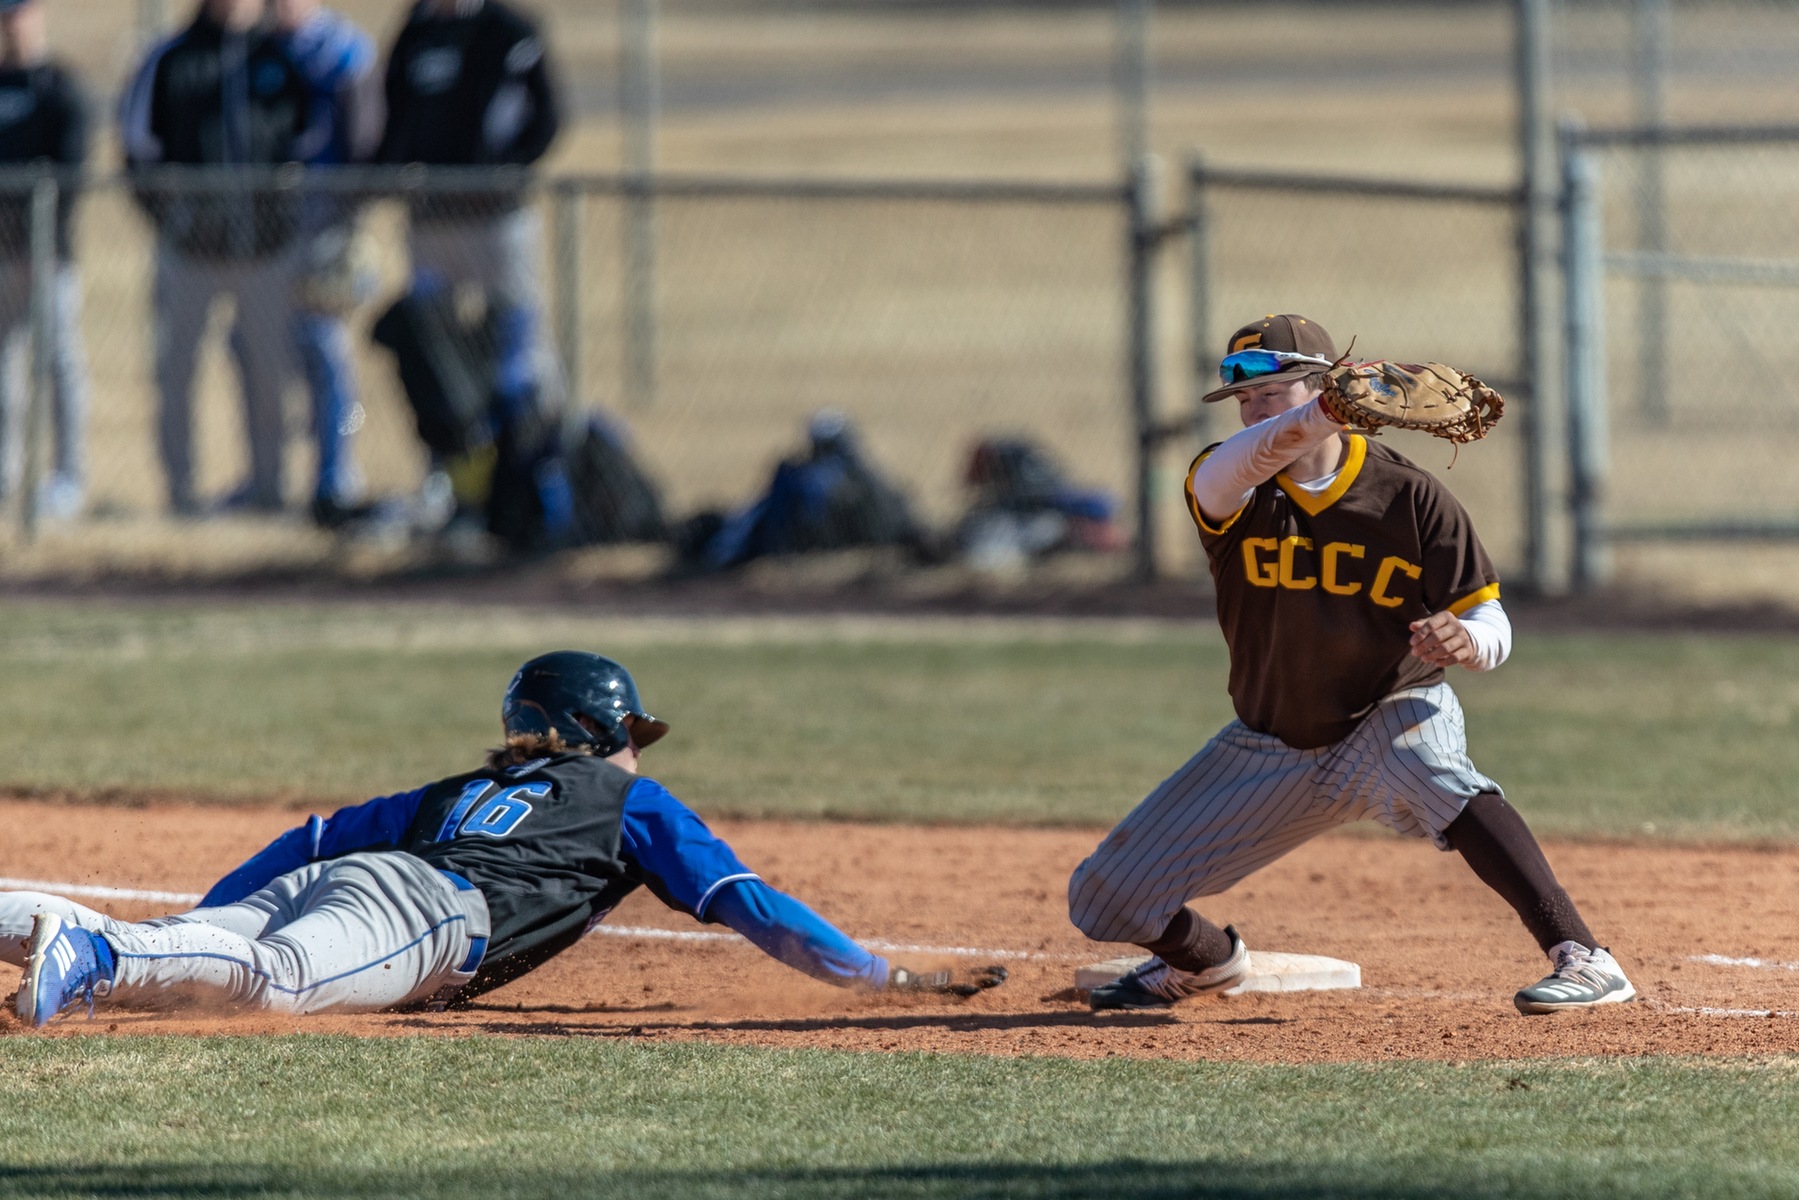 Reivers power past Broncbusters in game two